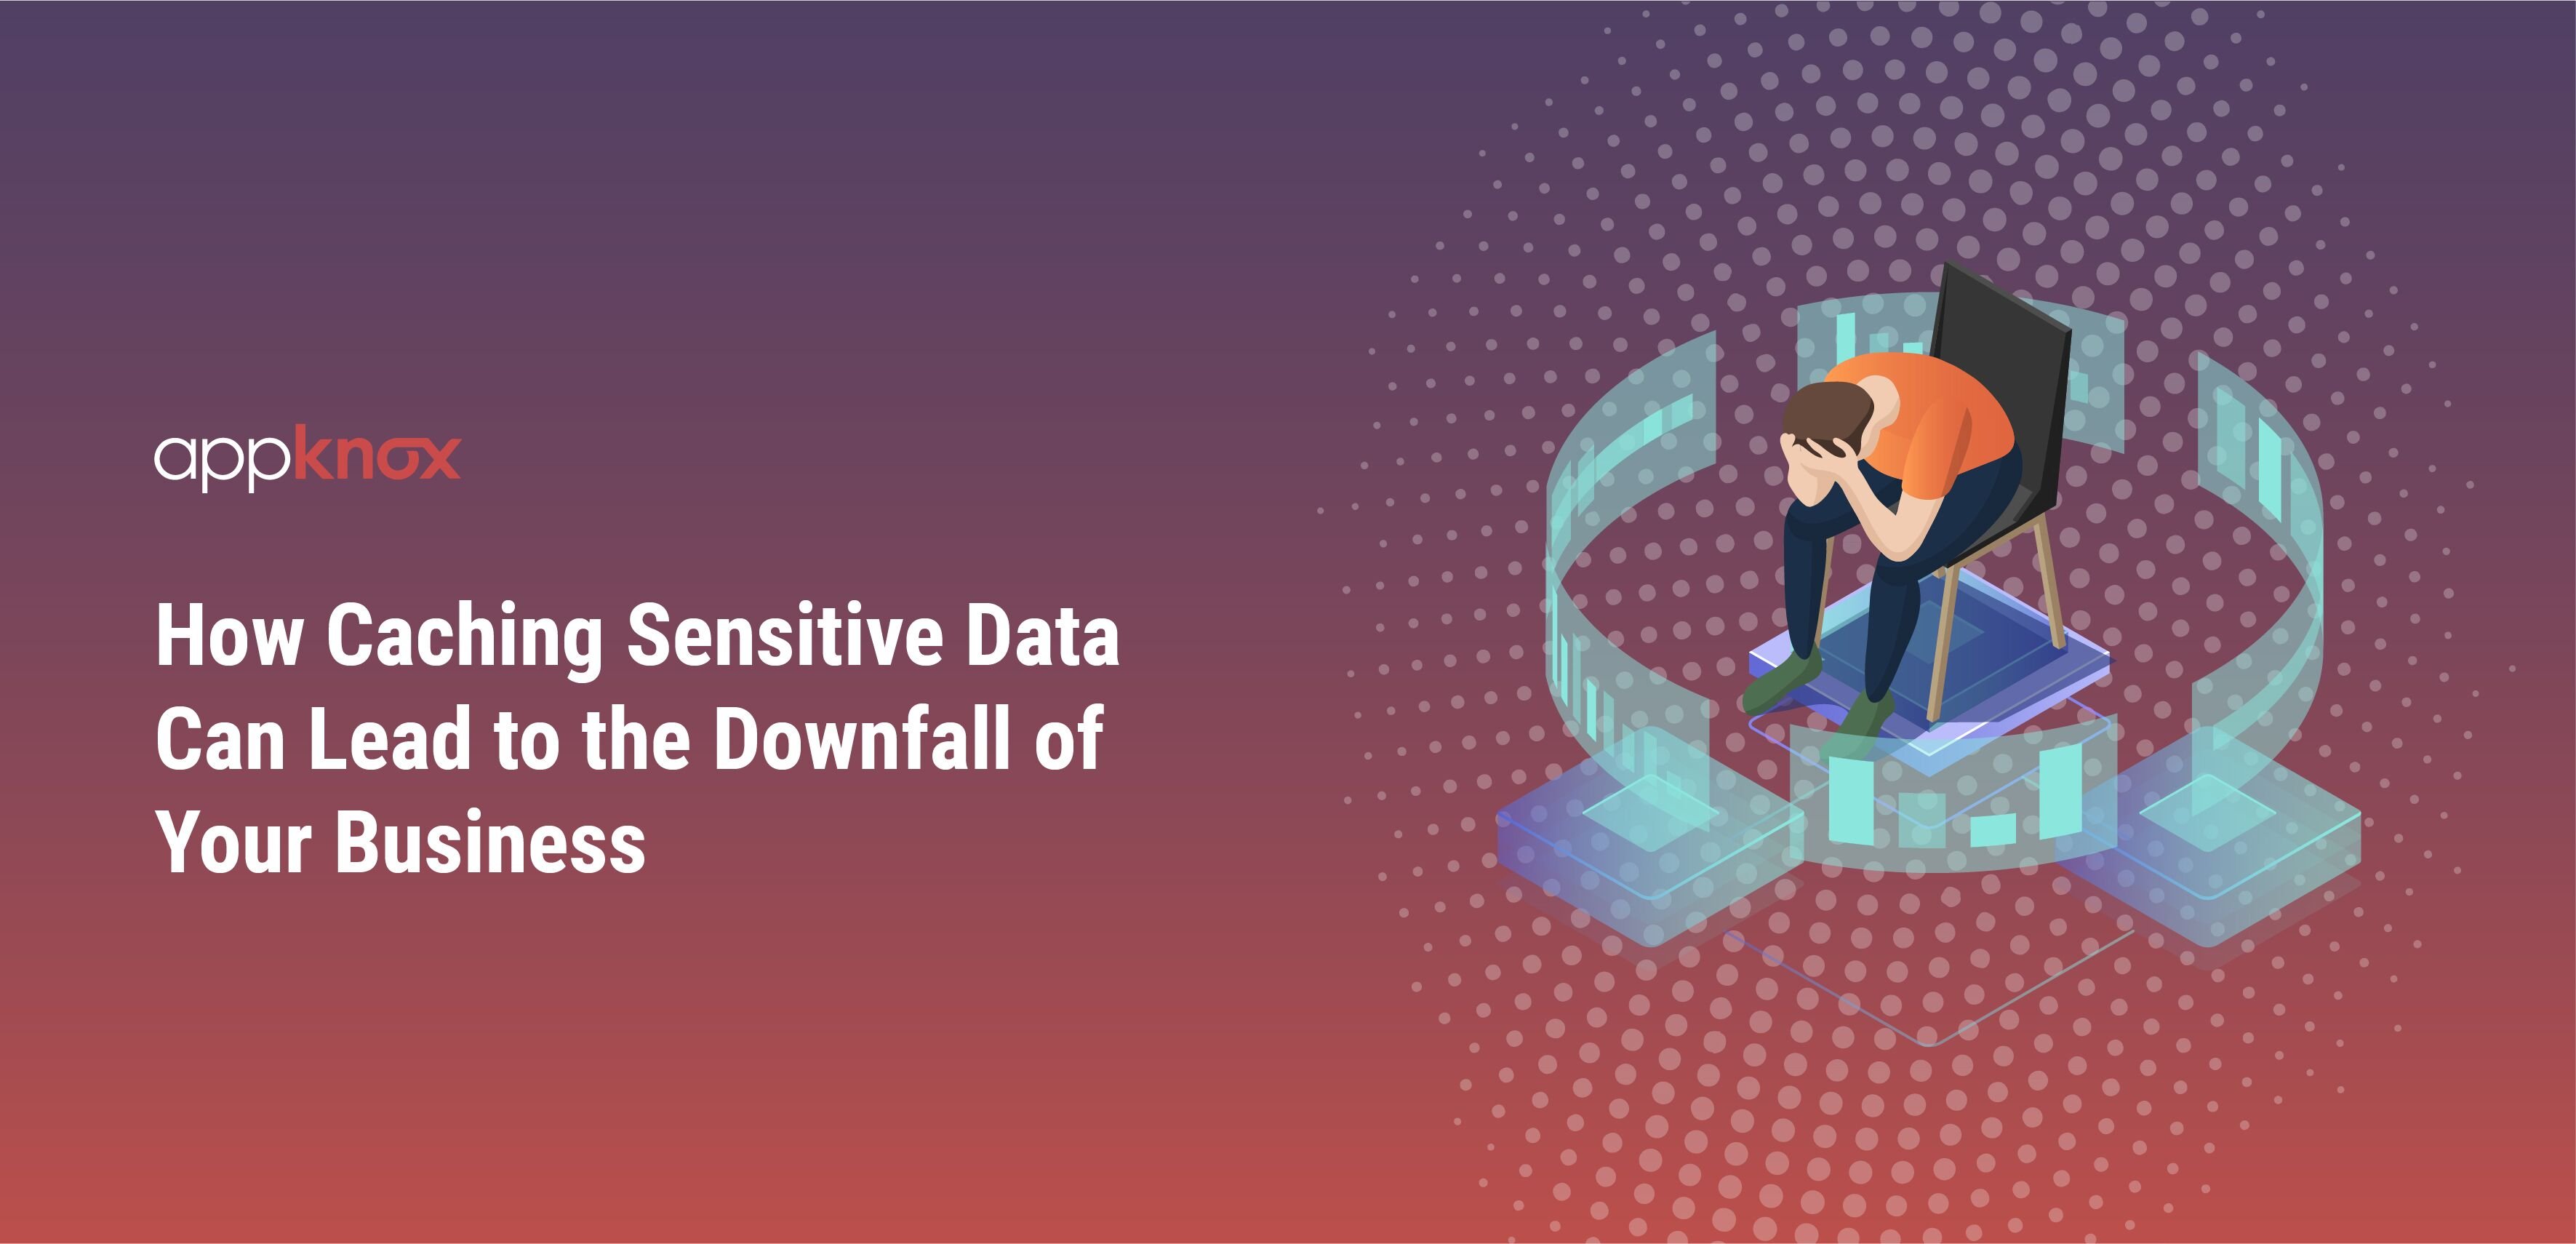 How Caching Sensitive Data Can Lead to the Downfall of Your Business